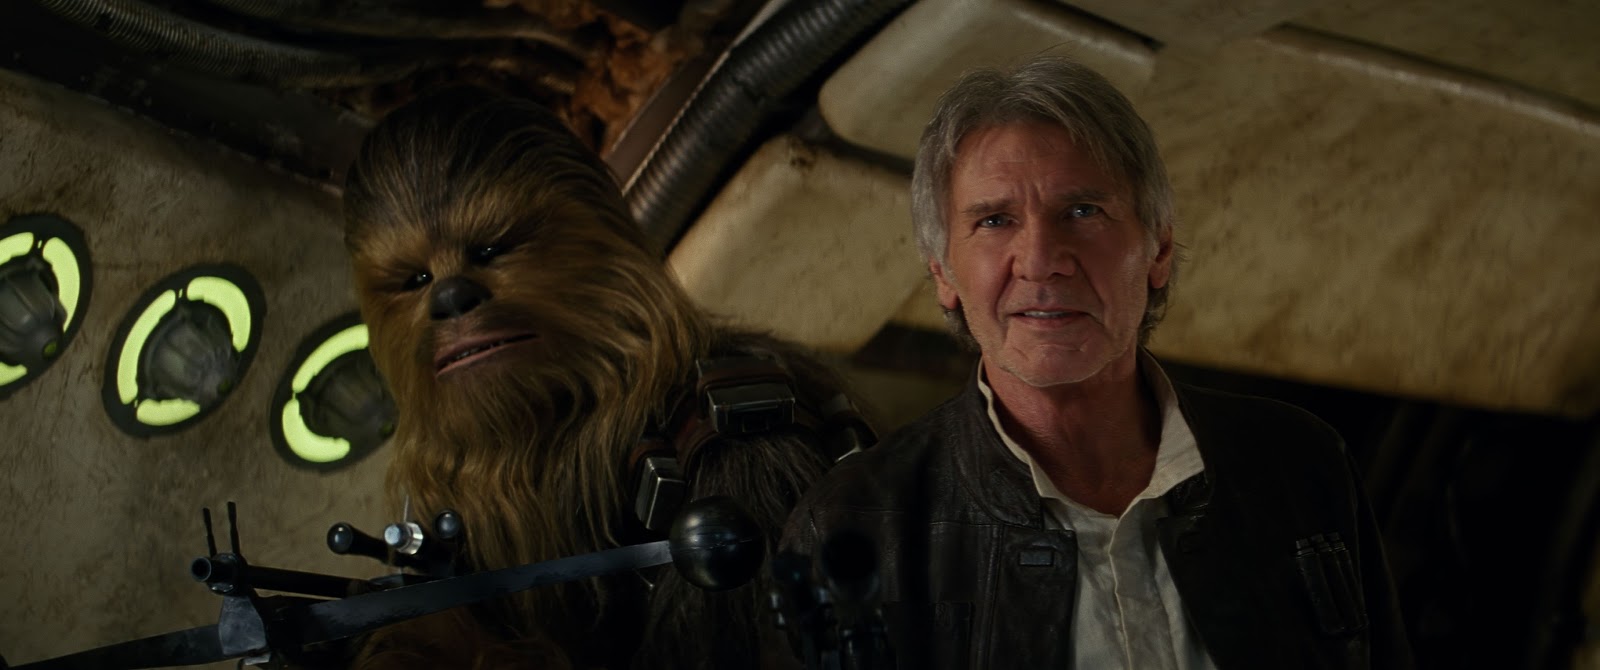 What We Thought About Star Wars: The Force Awakens